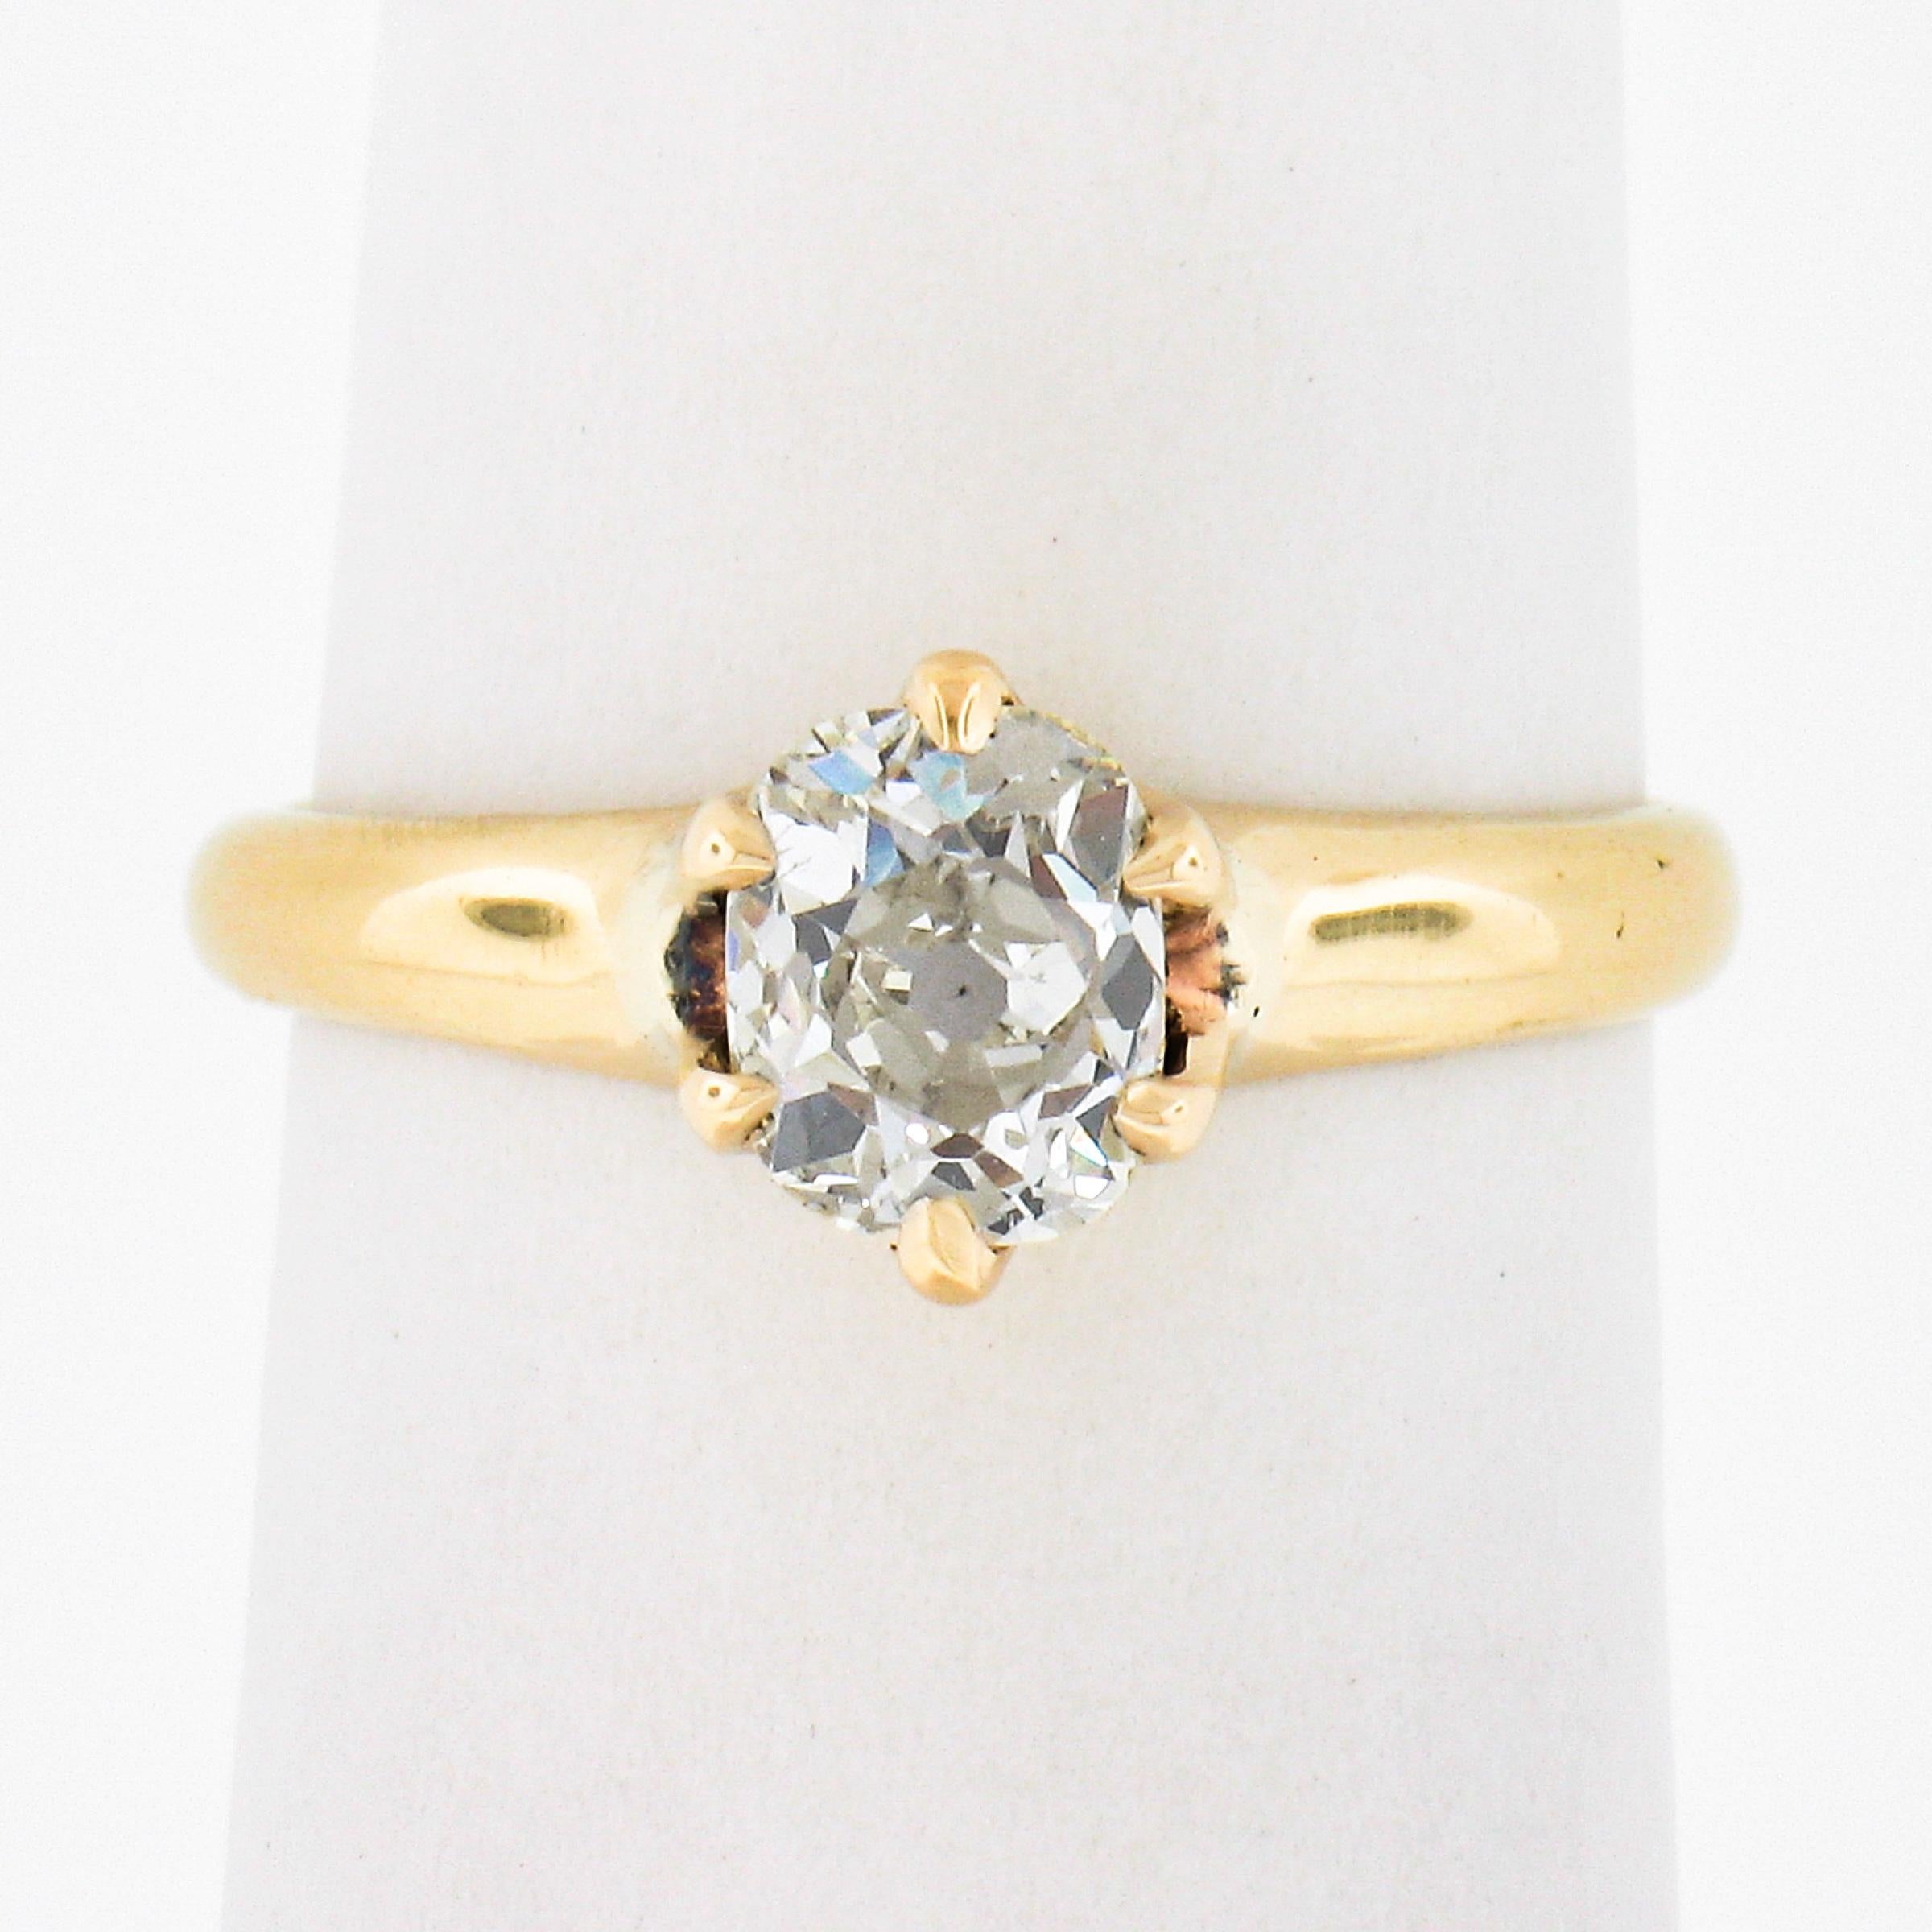 This beautiful, petite, antique diamond solitaire ring was crafted from solid 14k yellow gold during the Victorian era. The ring features an old mine cushion cut diamond solitaire which is claw prong set at the center. This diamond has a lot of